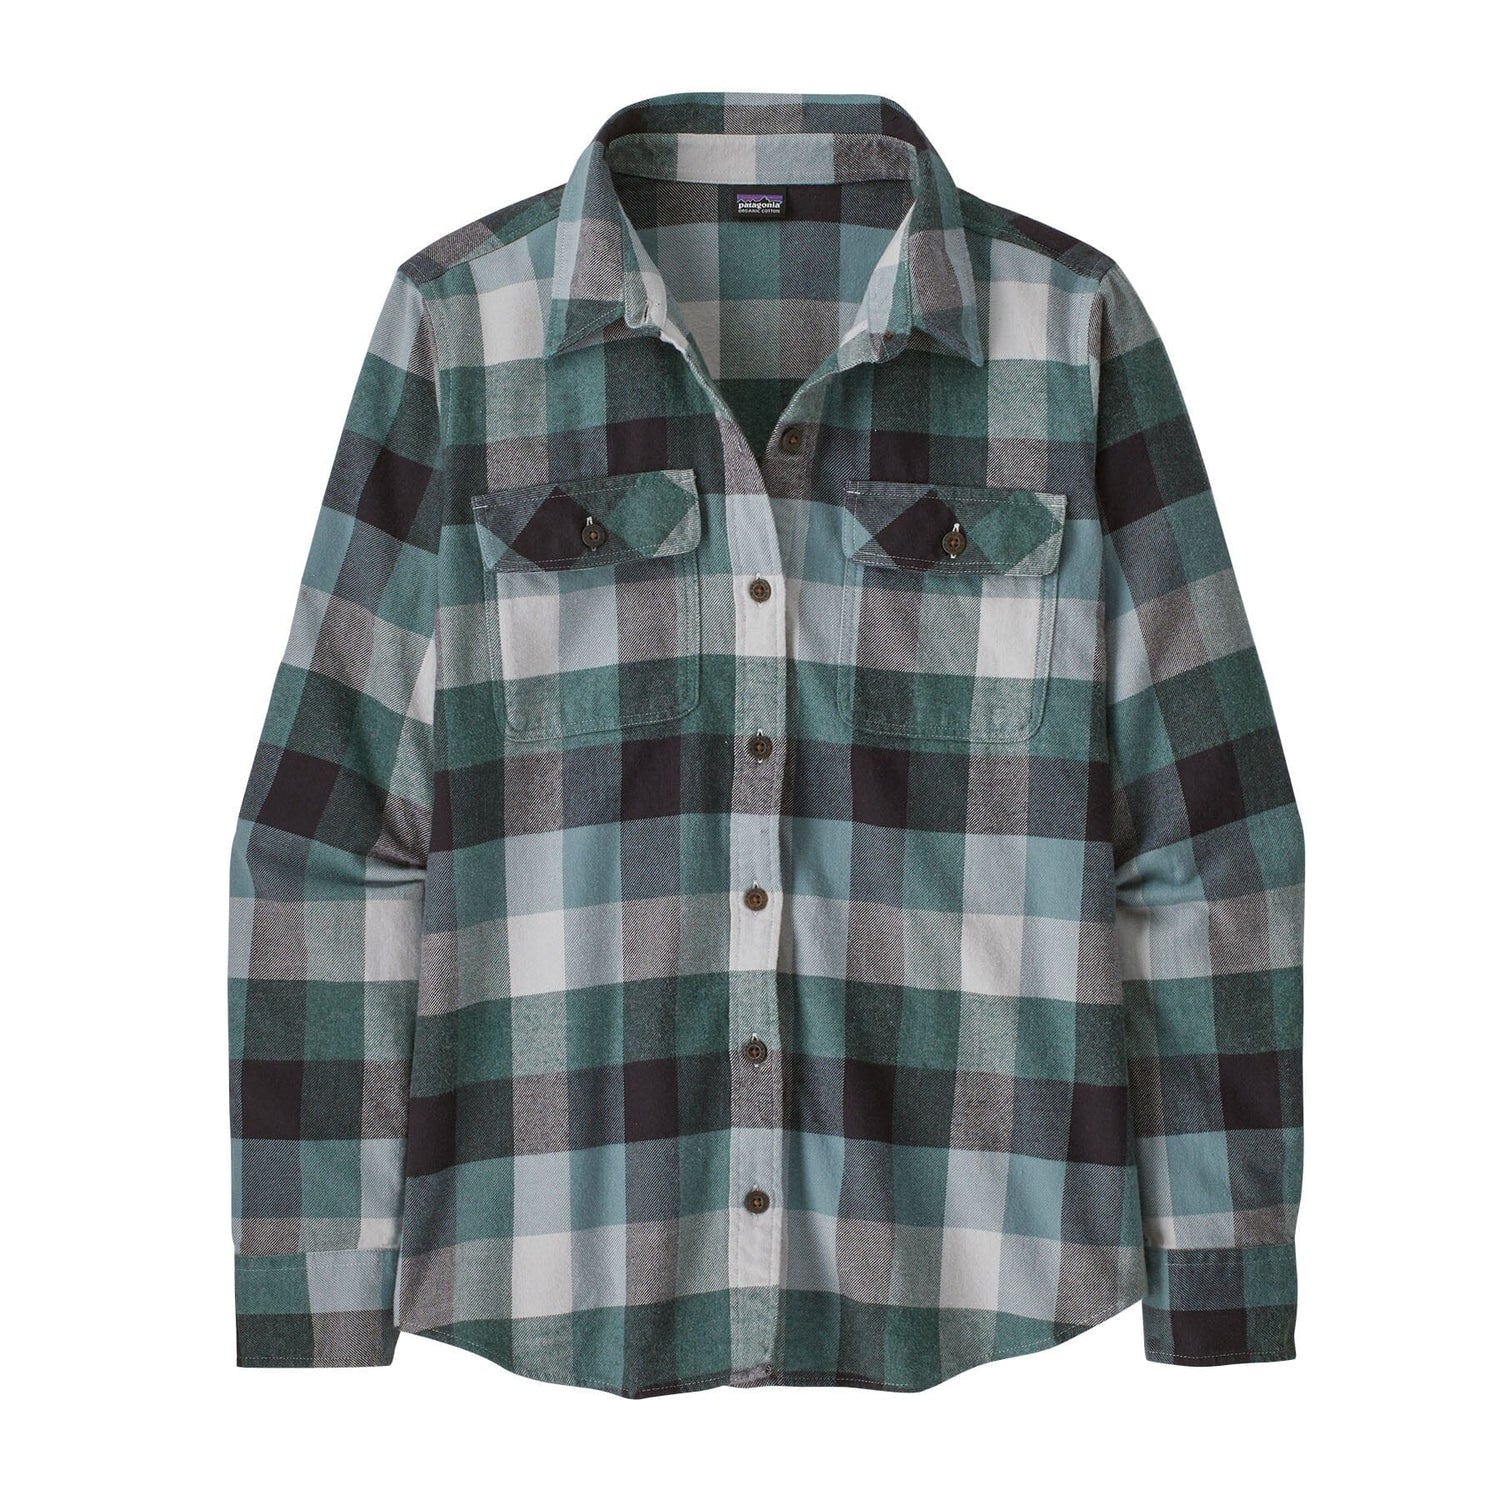 Patagonia - W's Long-Sleeved Fjord Flannel Shirt - 100% organic cotton - Weekendbee - sustainable sportswear